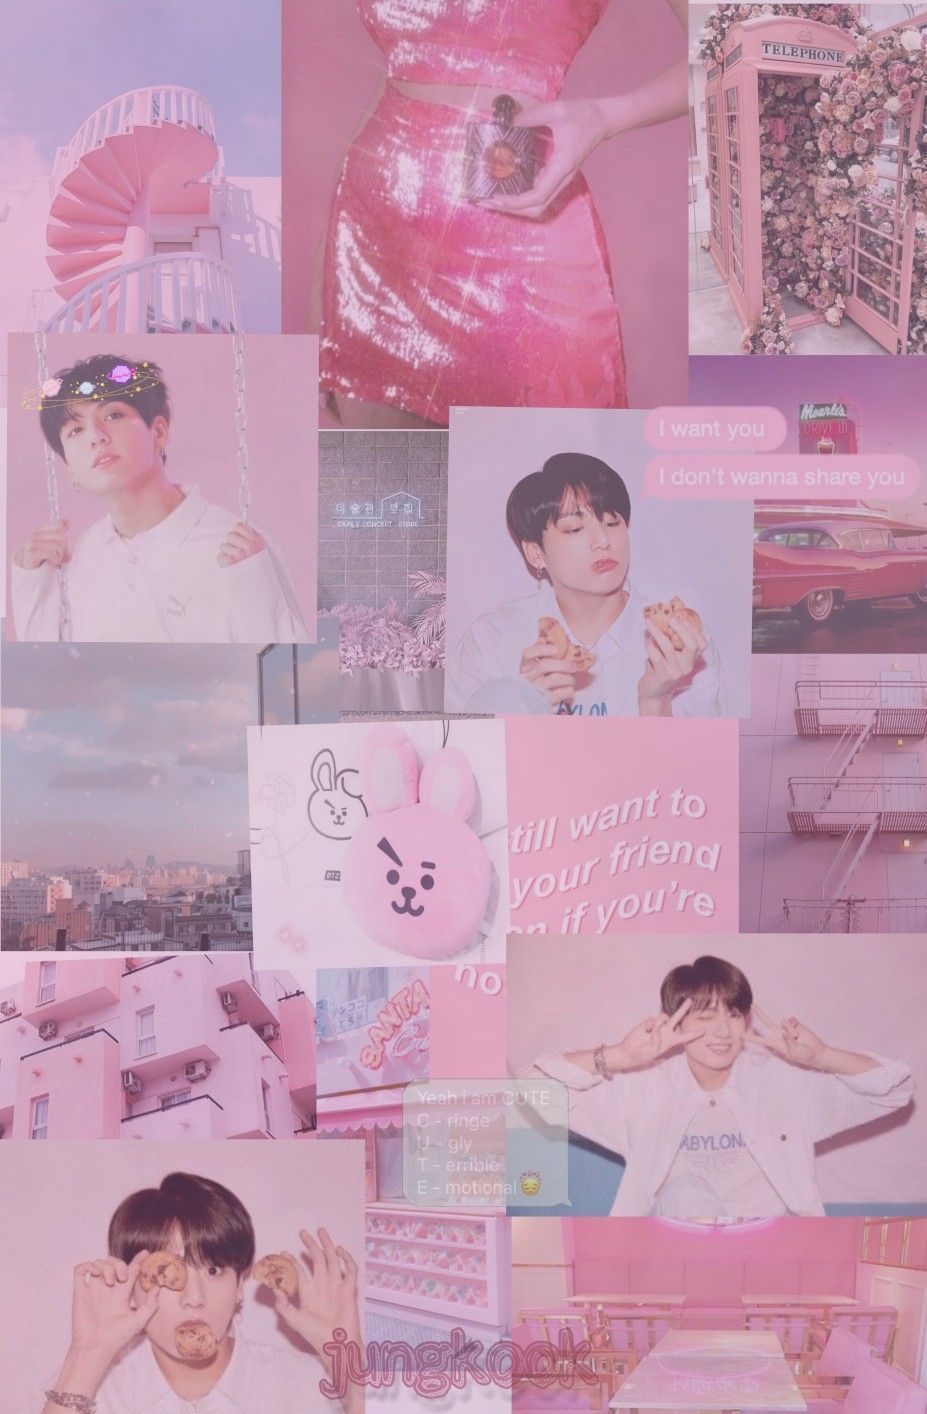 Bts Aesthetic Wallpaper for mobile phone, tablet, desktop computer and other devices HD and. Bts aesthetic wallpaper for phone, Bts laptop wallpaper, Bts jungkook